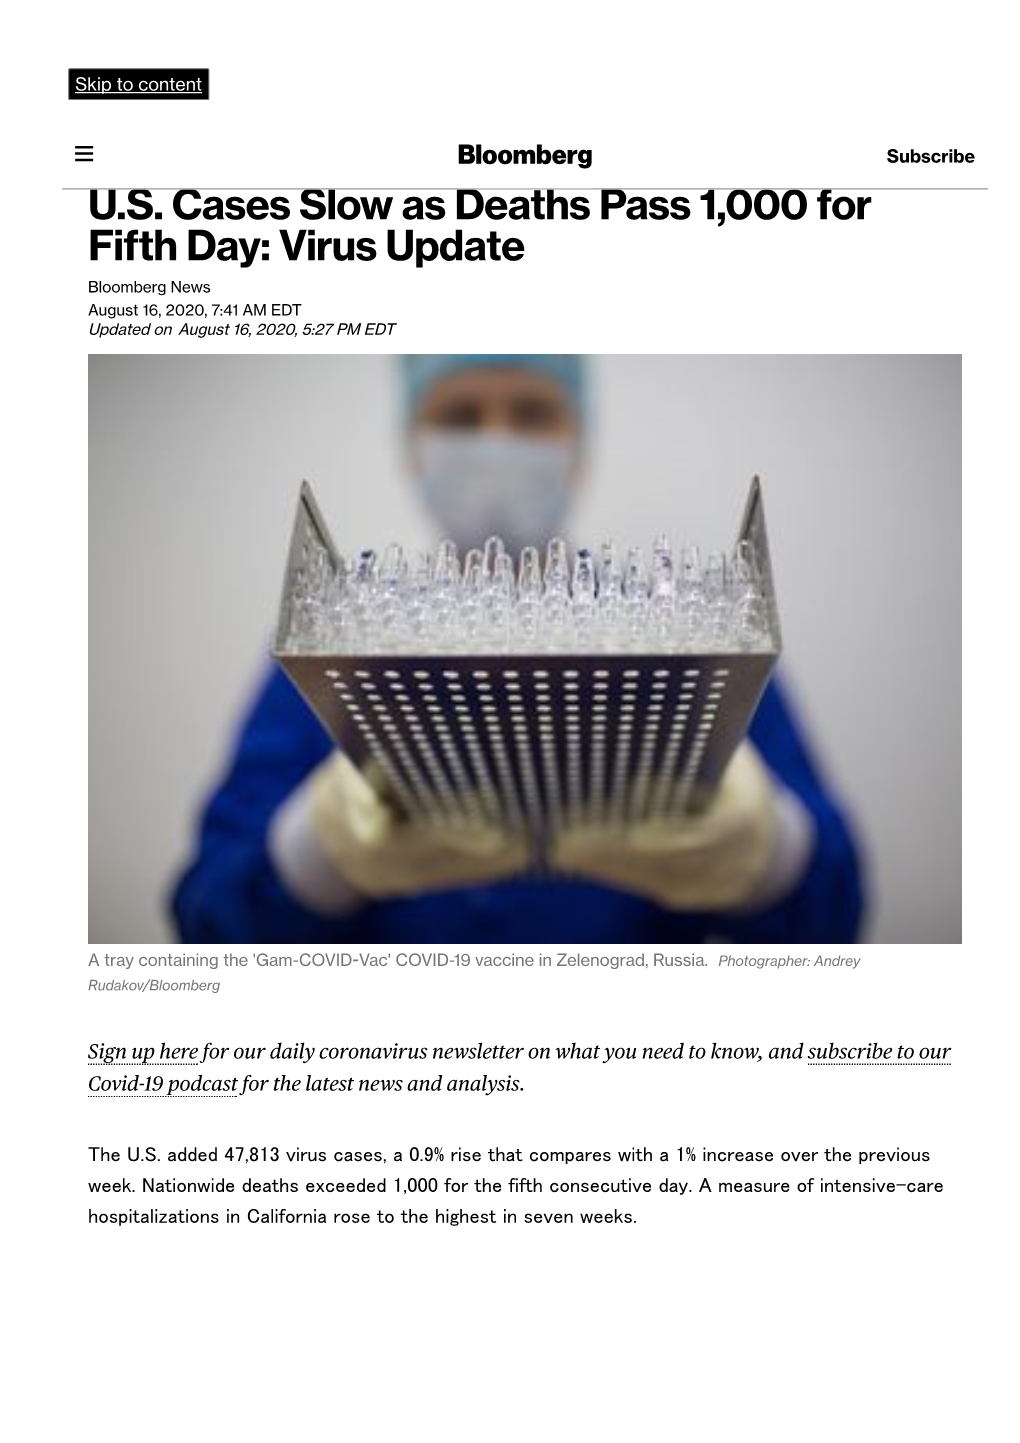 U.S. Cases Slow As Deaths Pass 1,000 for Fifth Day: Virus Update Bloomberg News August 16, 2020, 7:41 AM EDT Updated on August 16, 2020, 5:27 PM EDT